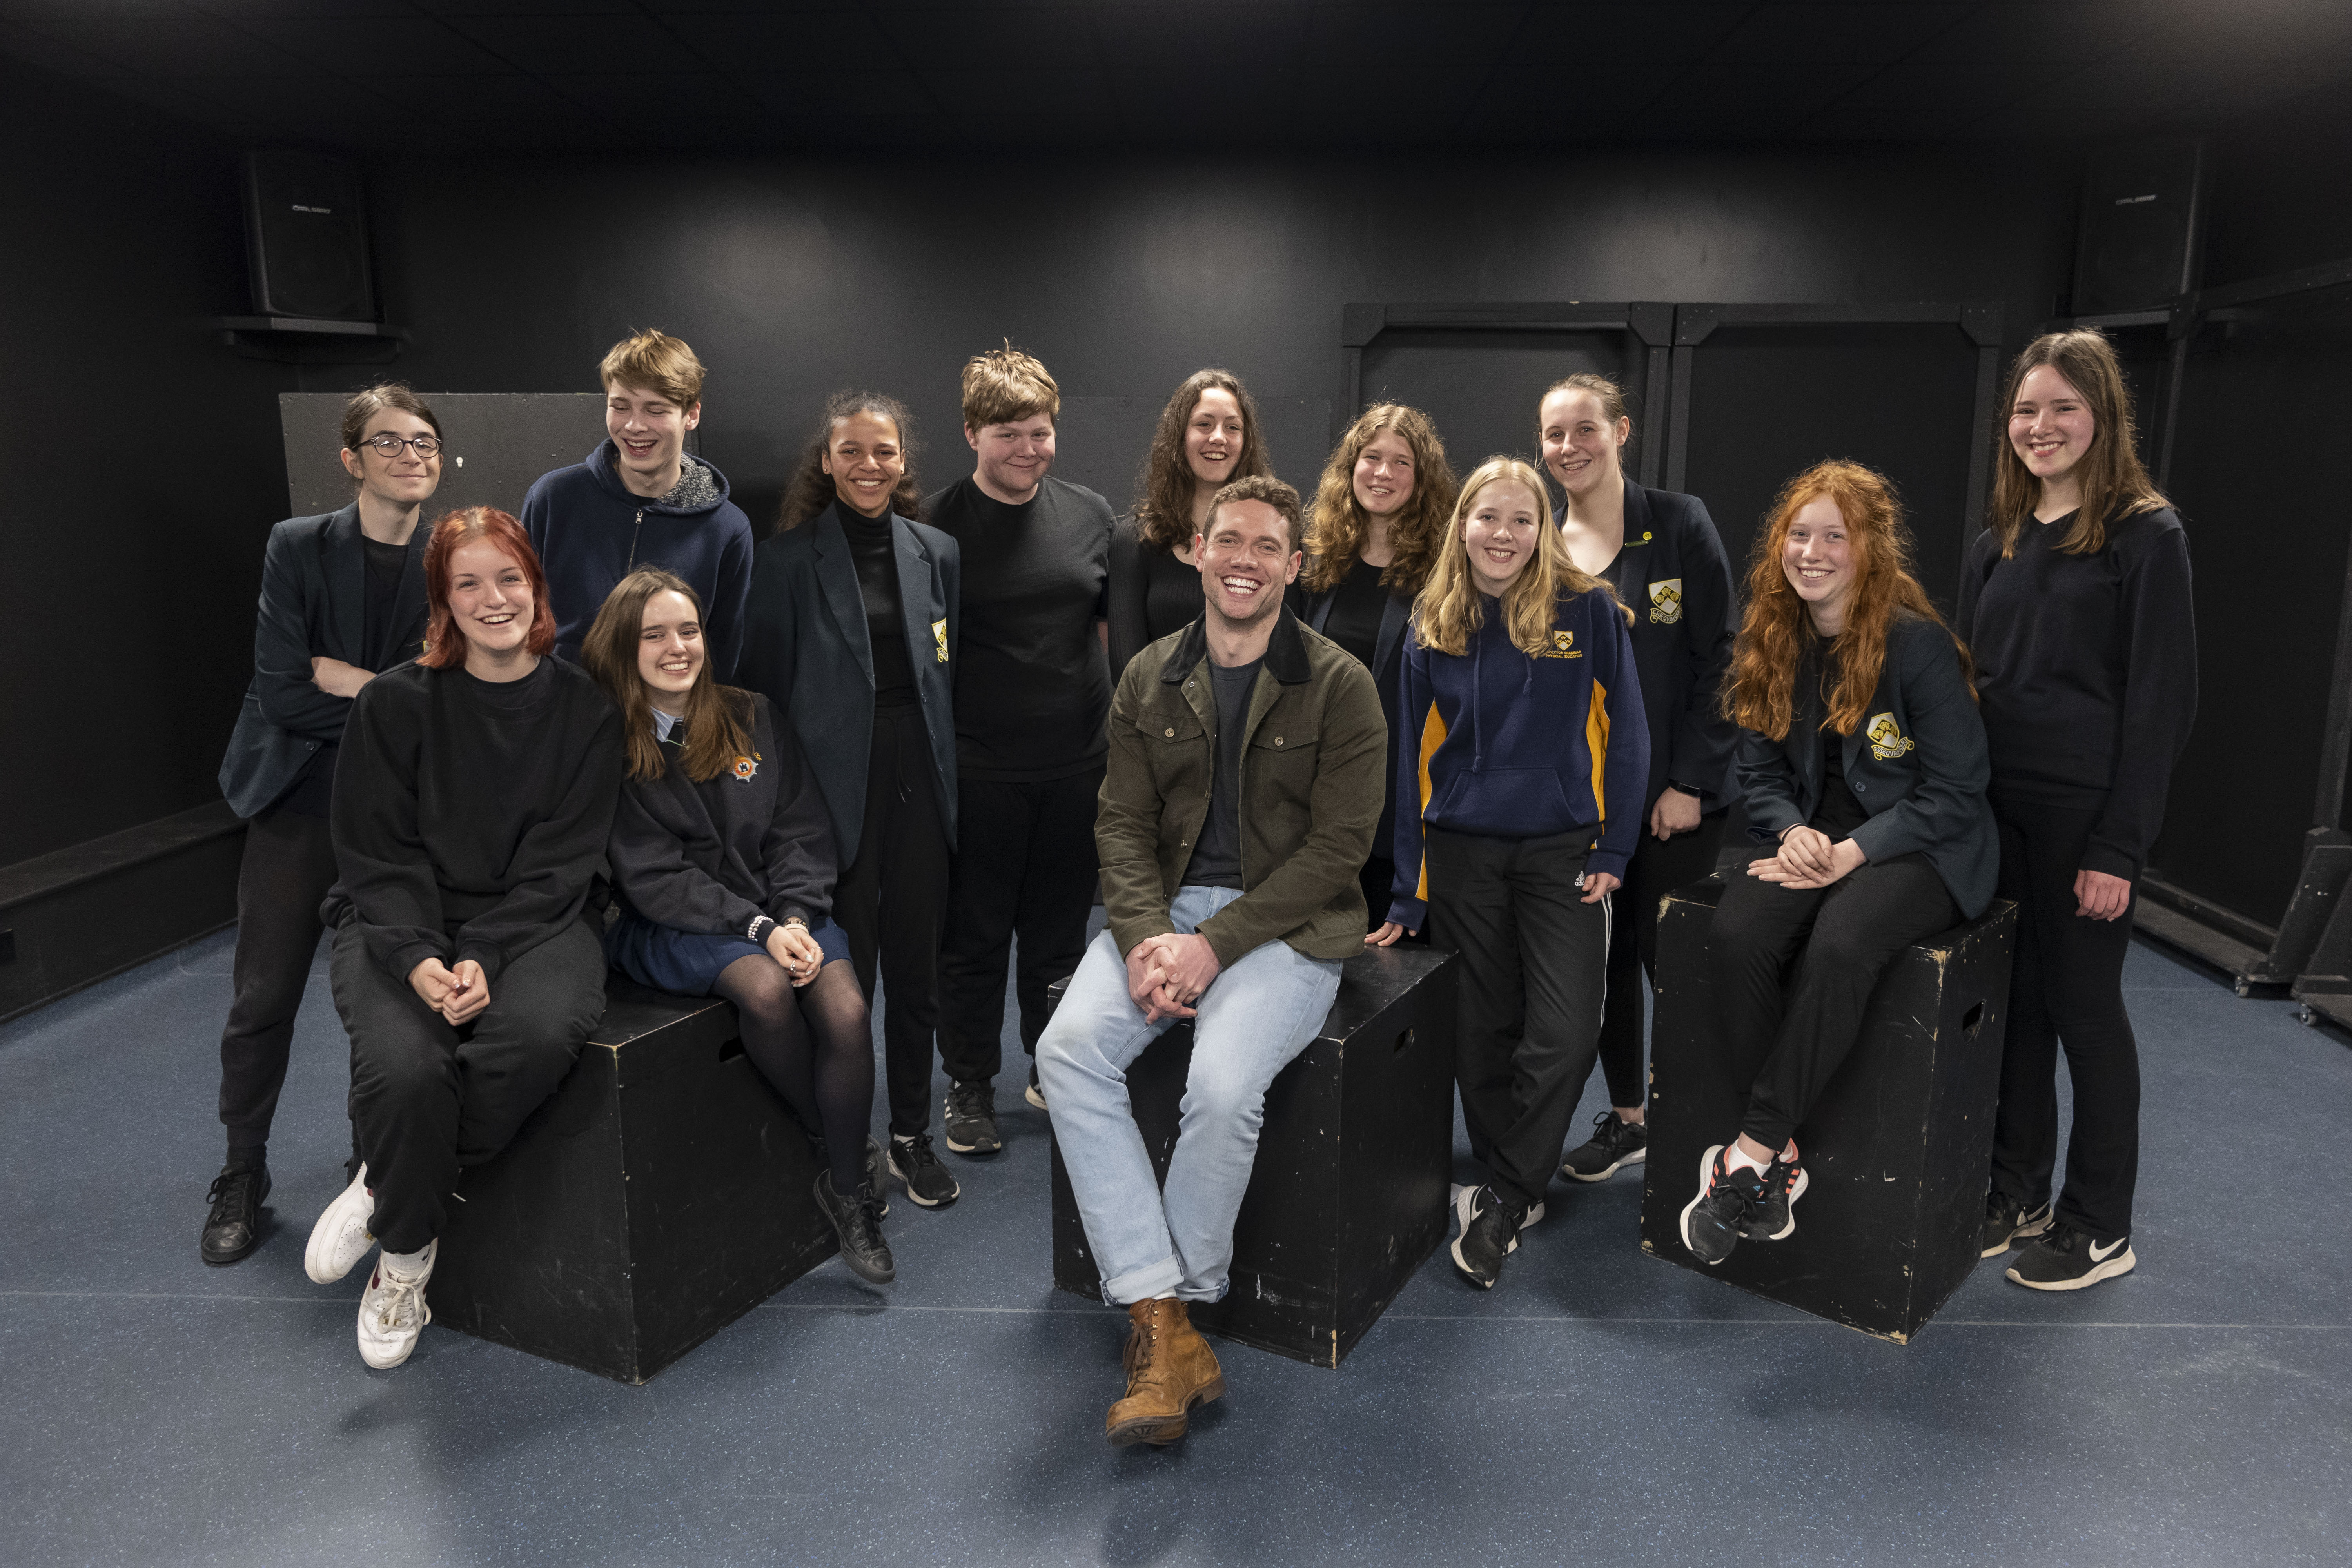 Tom with Year 10 and Year 12 Drama students at Colyton Grammar School